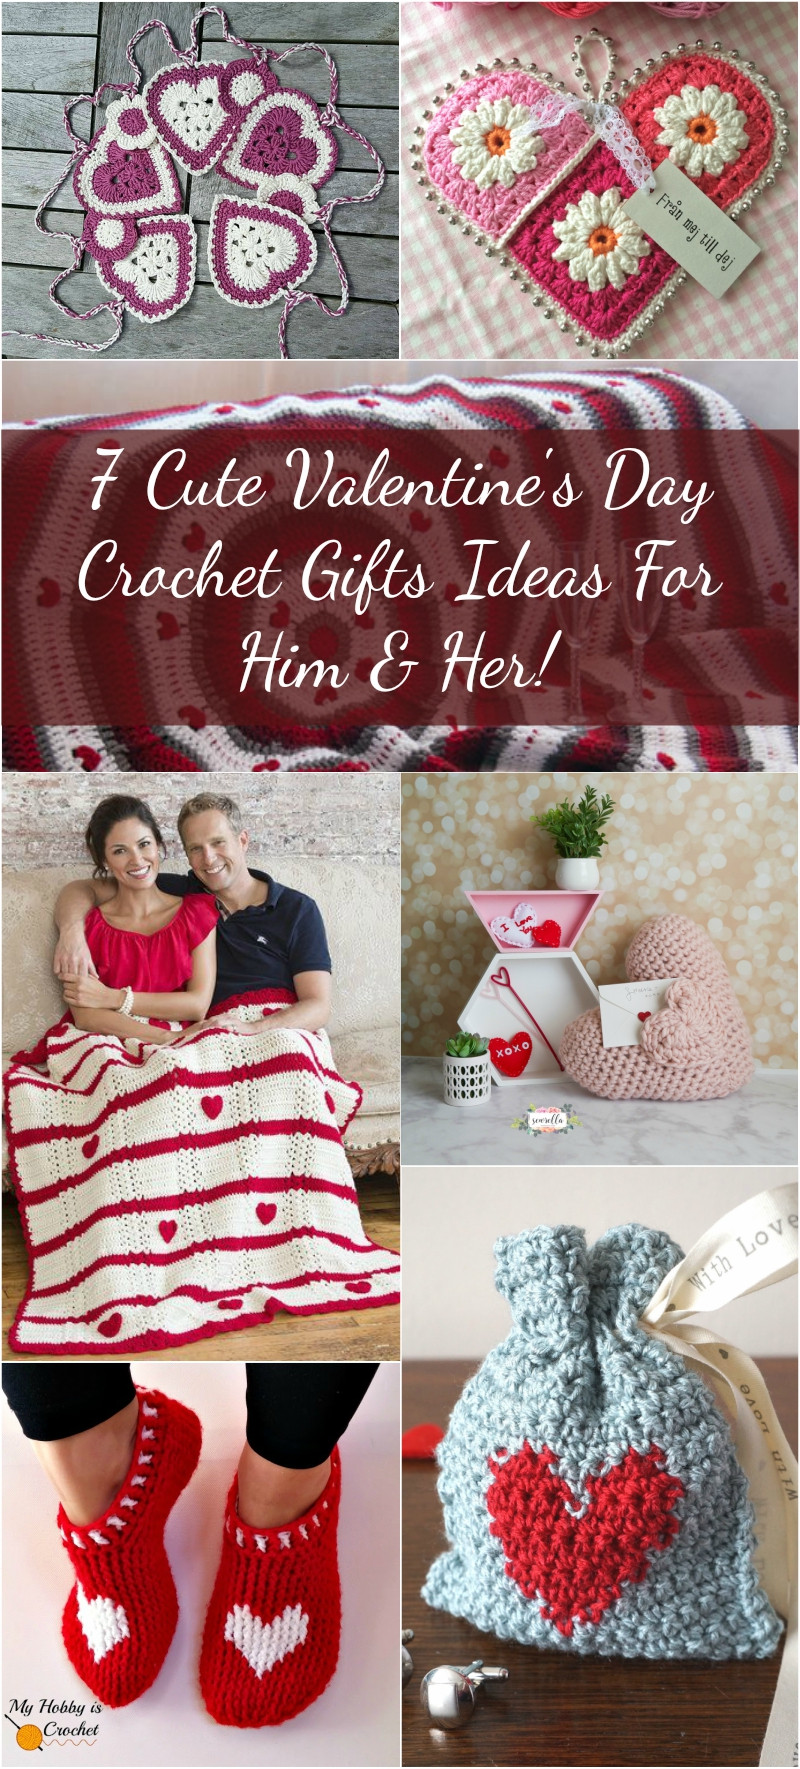 Cute Valentines Day Ideas For Him
 7 Cute Valentine s Day Crochet Gifts Ideas For Him & Her